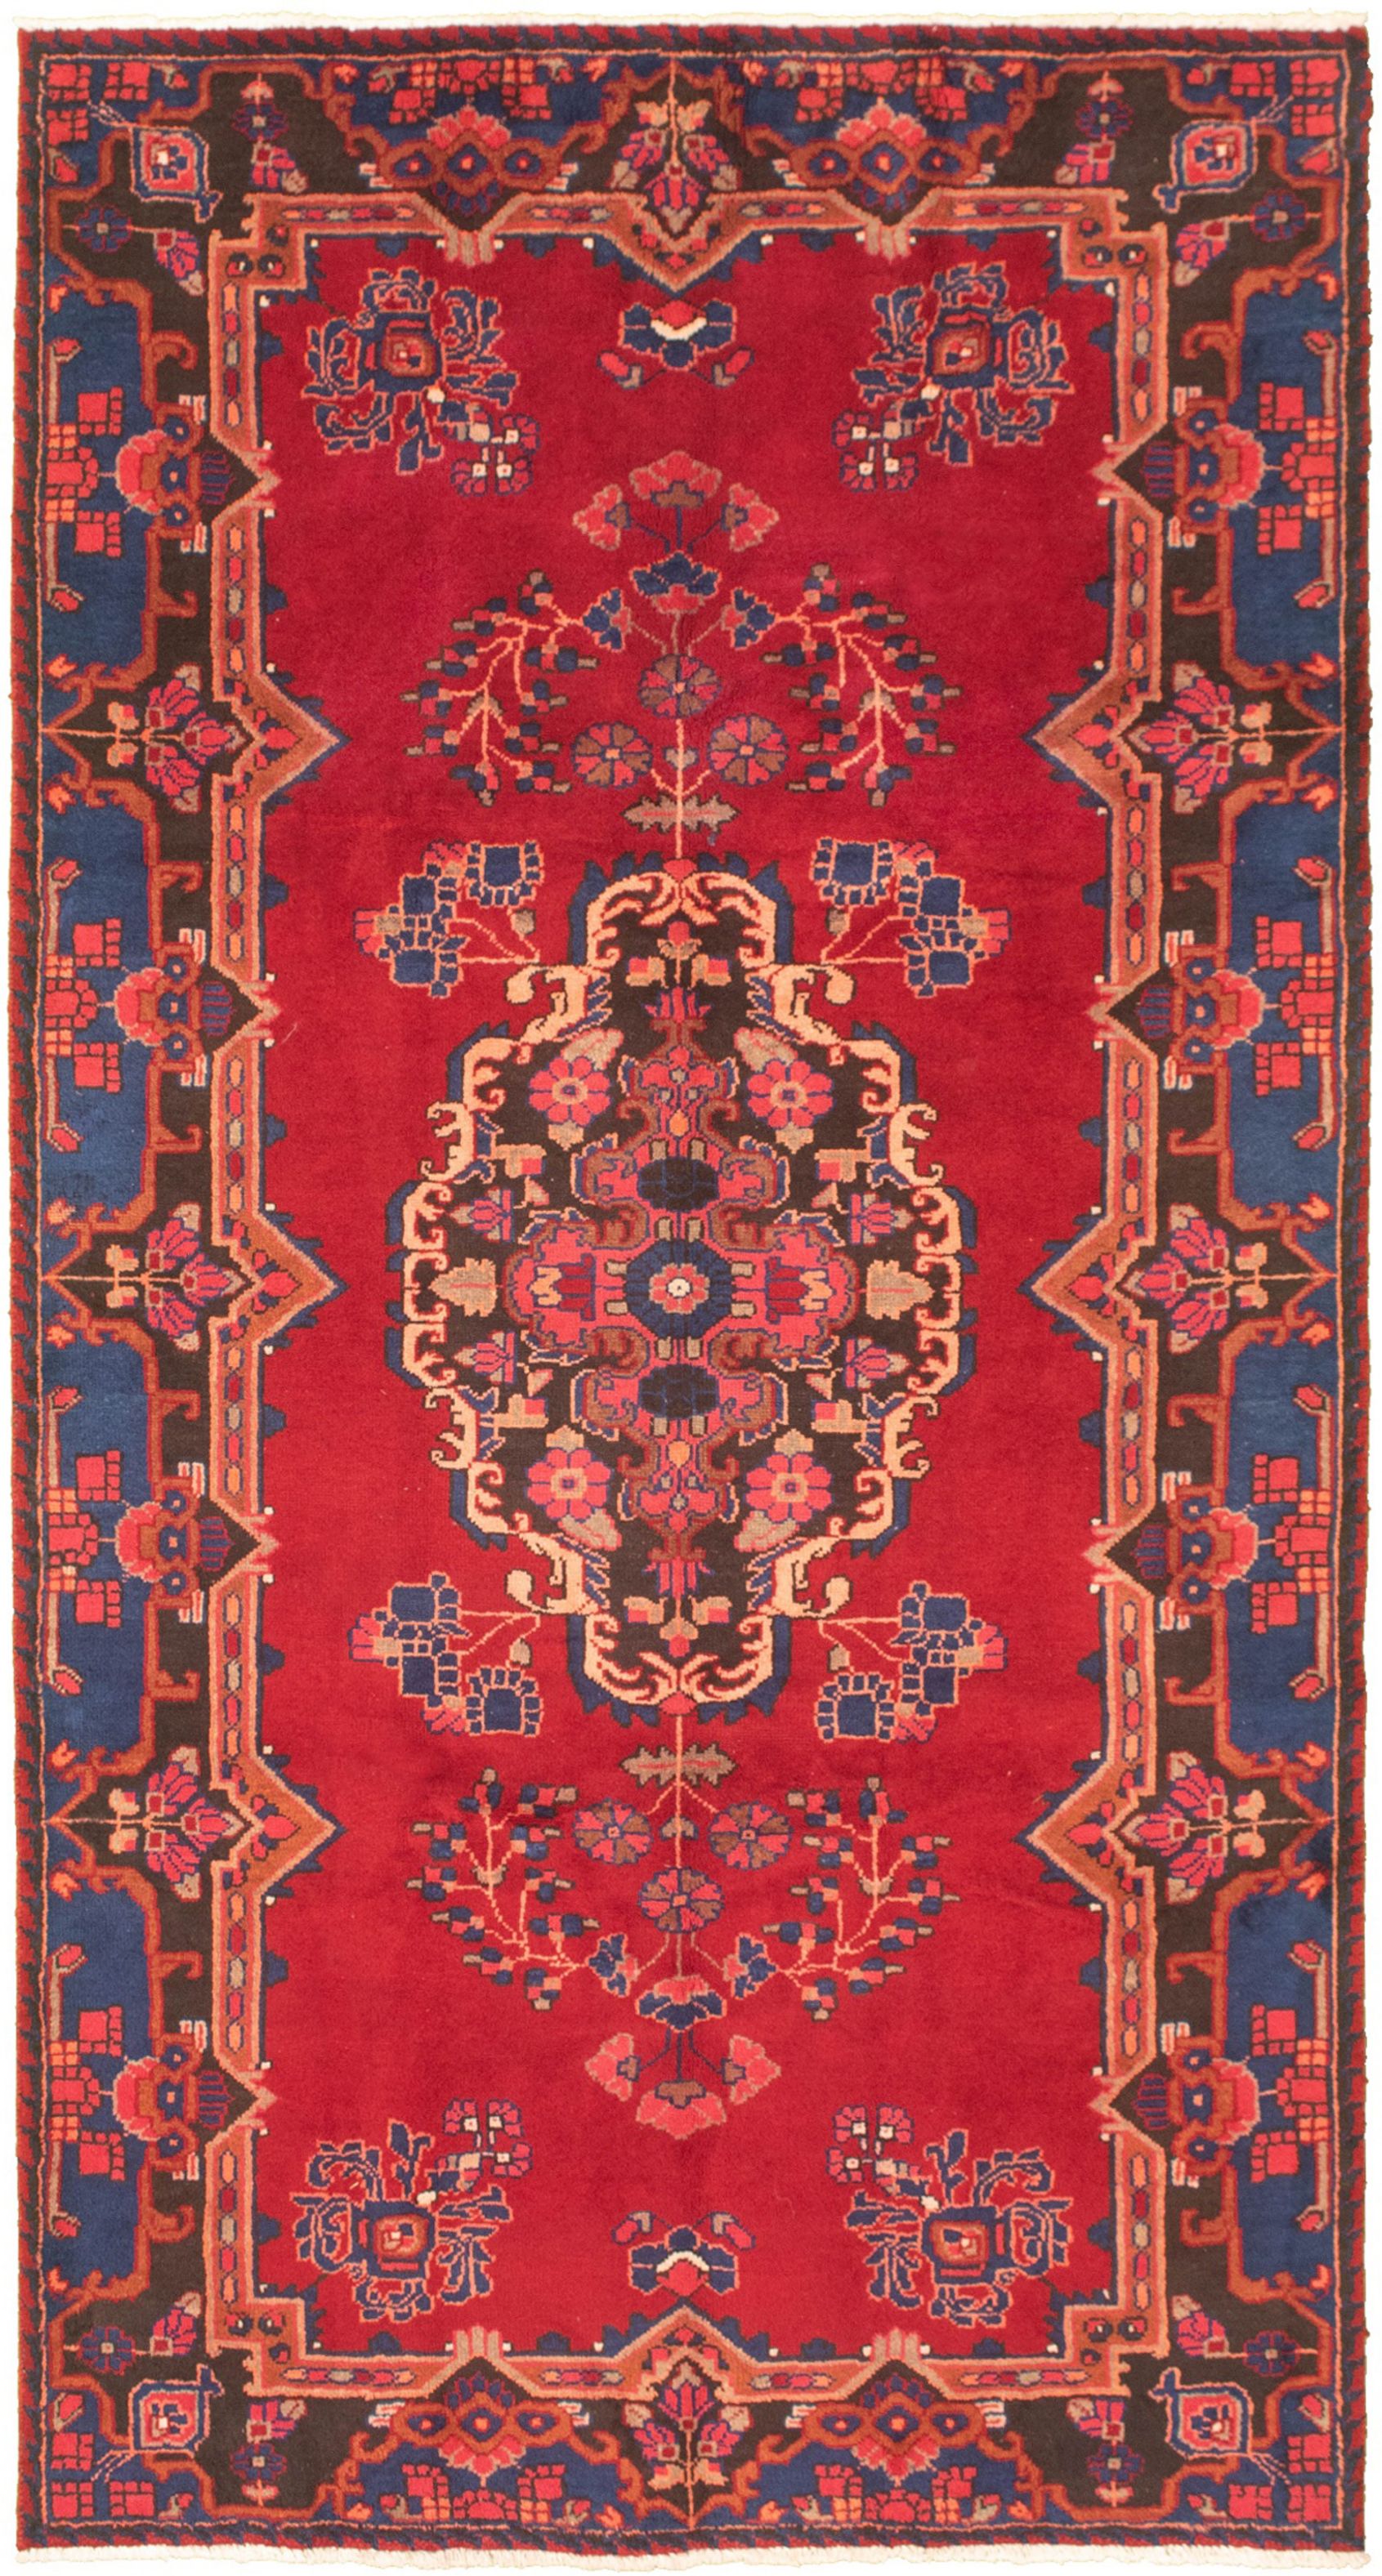 Hand-knotted Authentic Turkish Red Wool Rug 5'1" x 9'9"  Size: 5'1" x 9'9"  